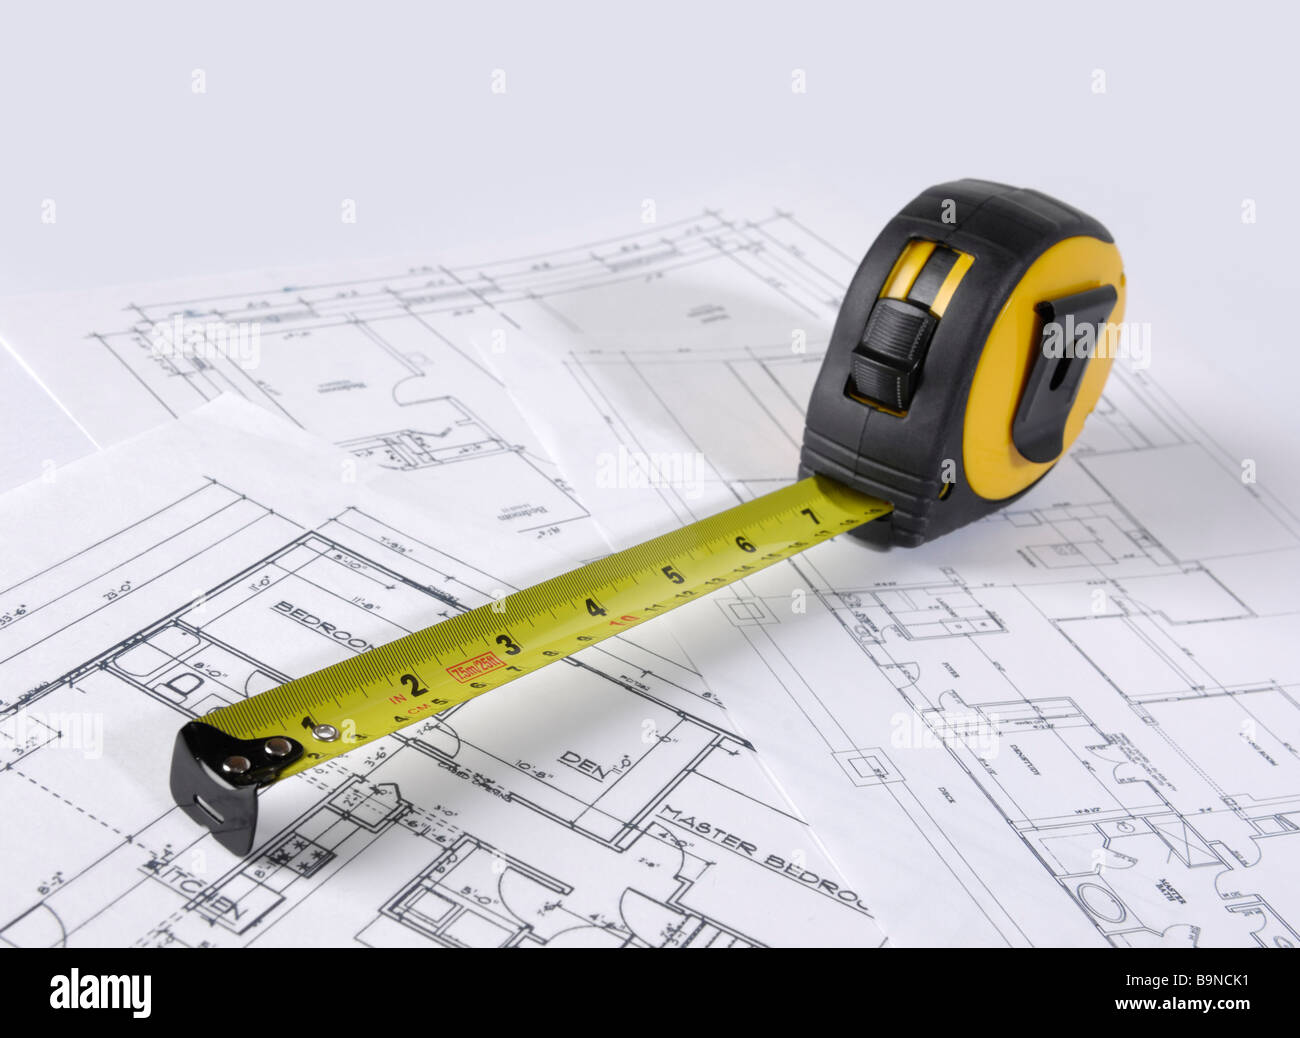 Drafting tools stock photo. Image of measure, education - 25924482